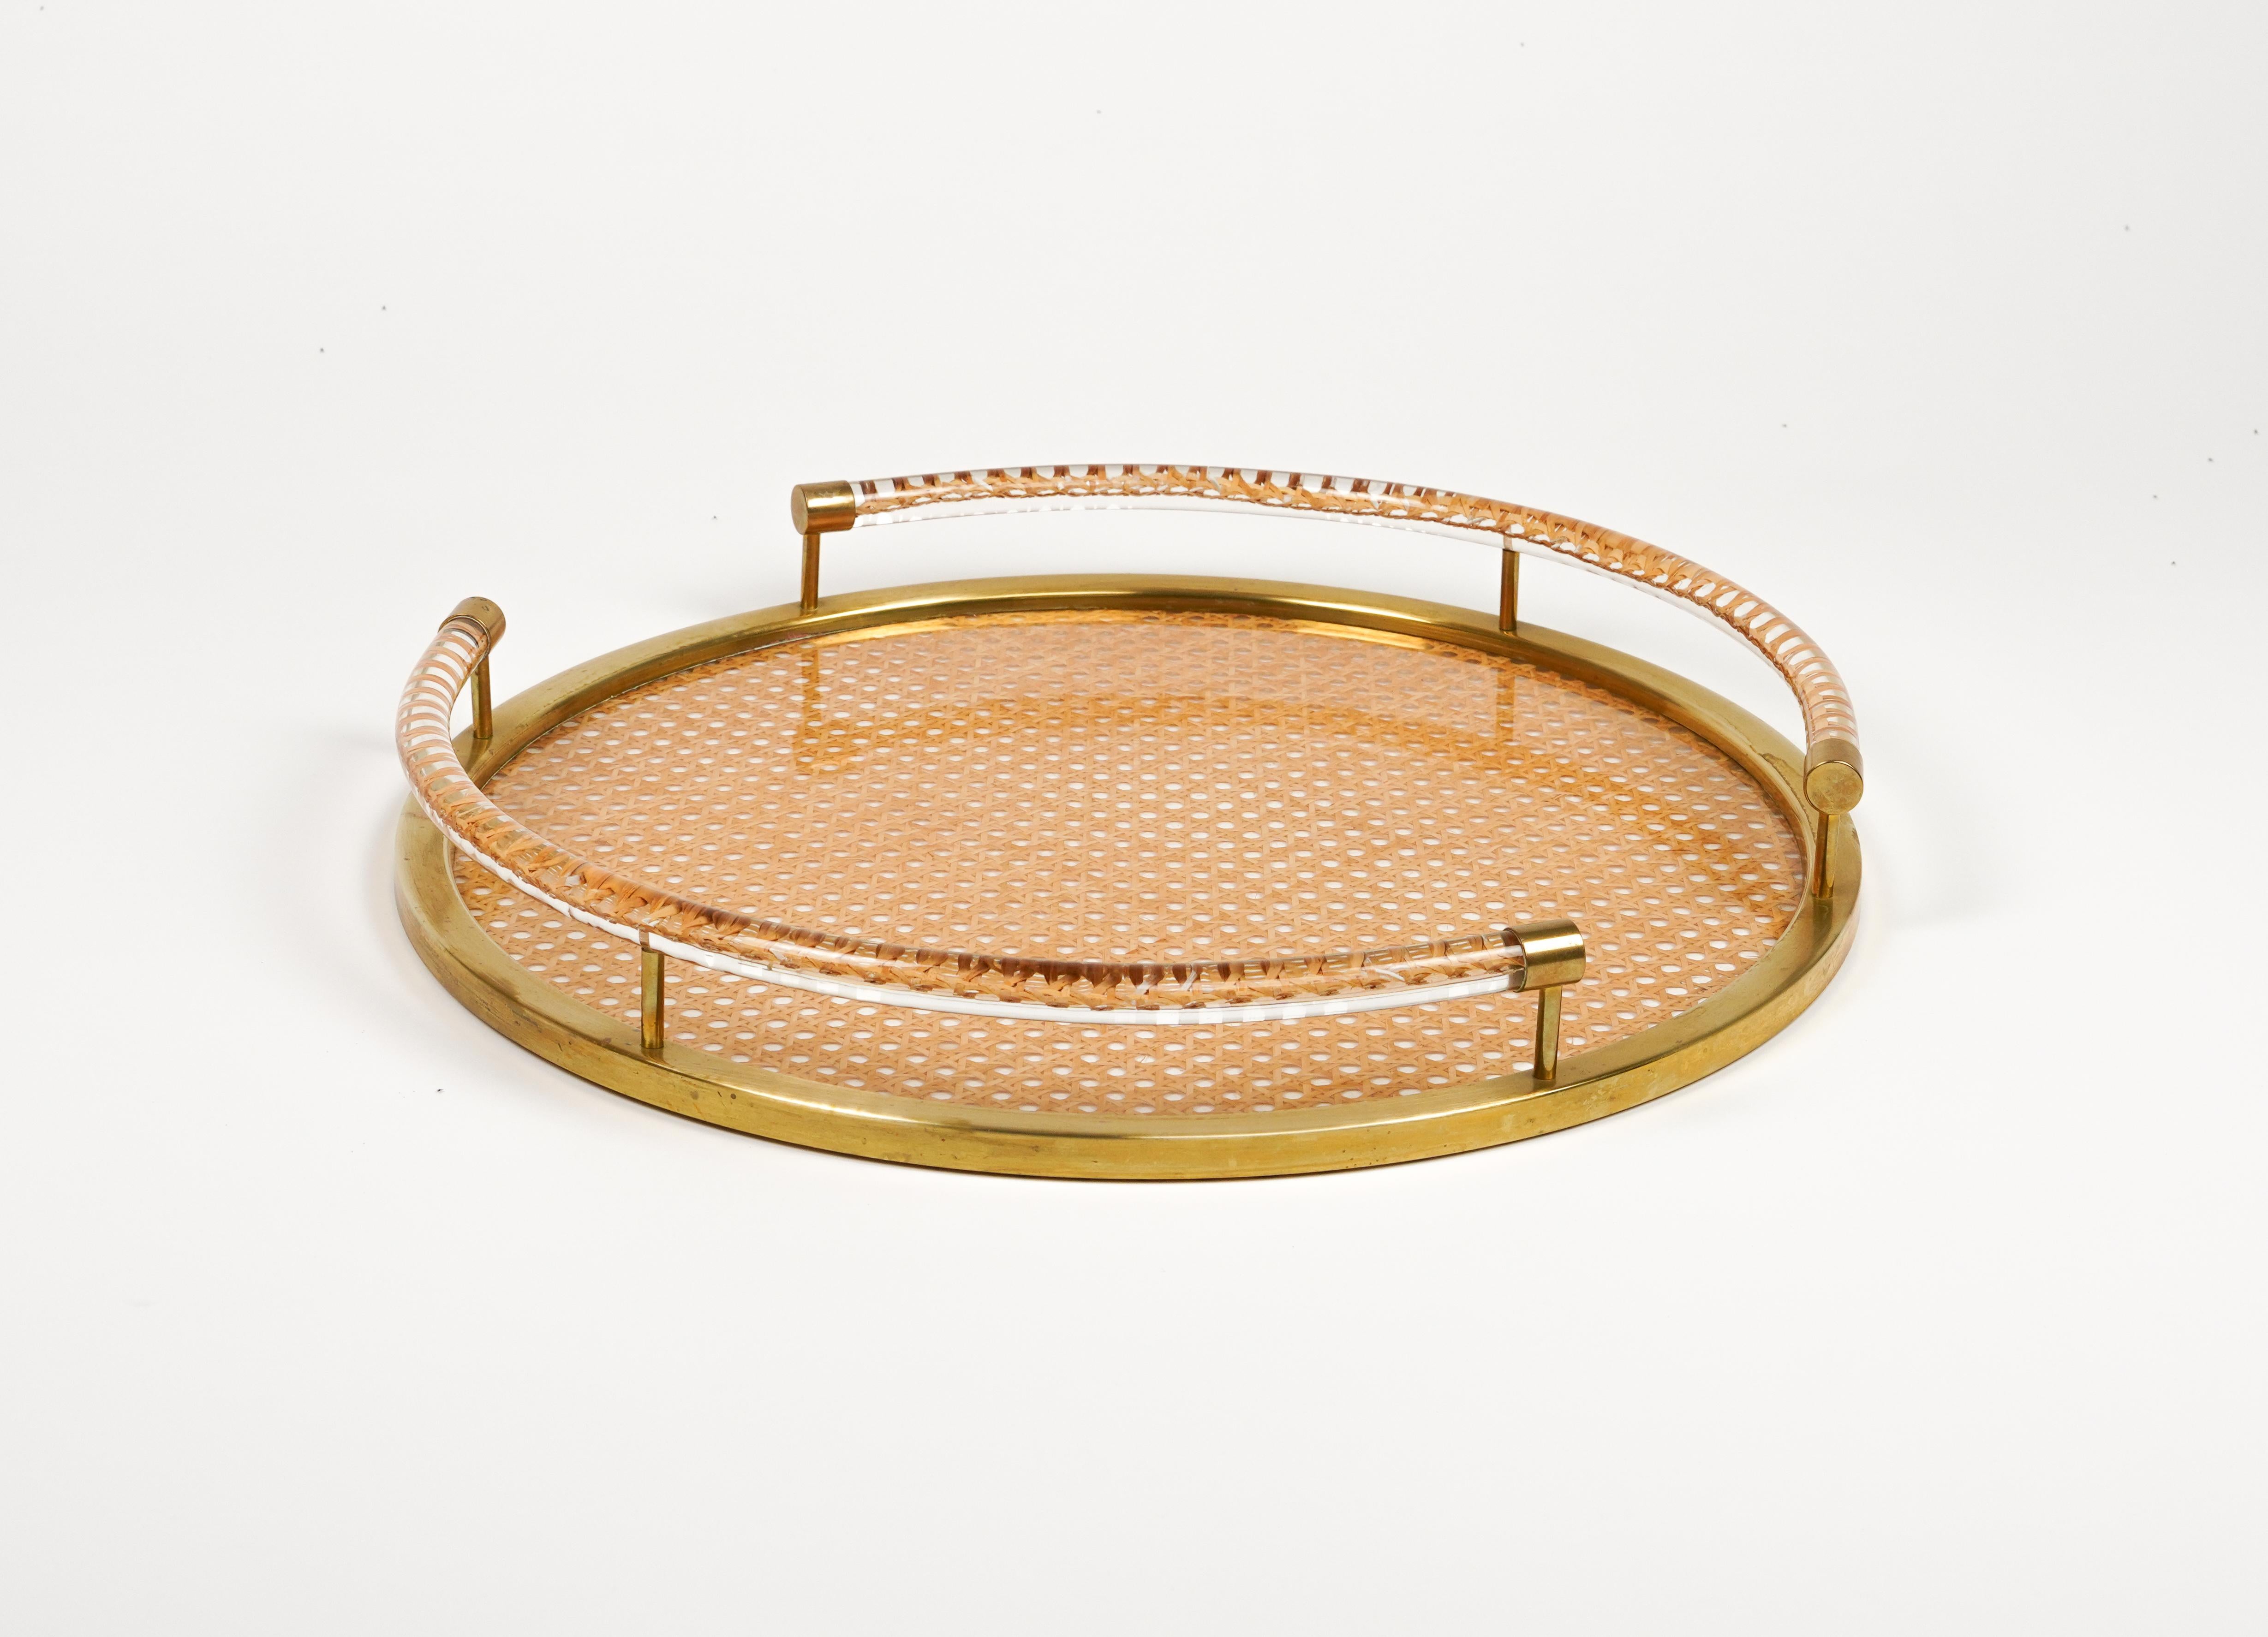 Midcentury amazing round serving tray / centerpiece in lucite and rattan with brass border in the style of Christian Dior Home.

Made in Italy in the 1970s.

Great accessory for any modern interior.